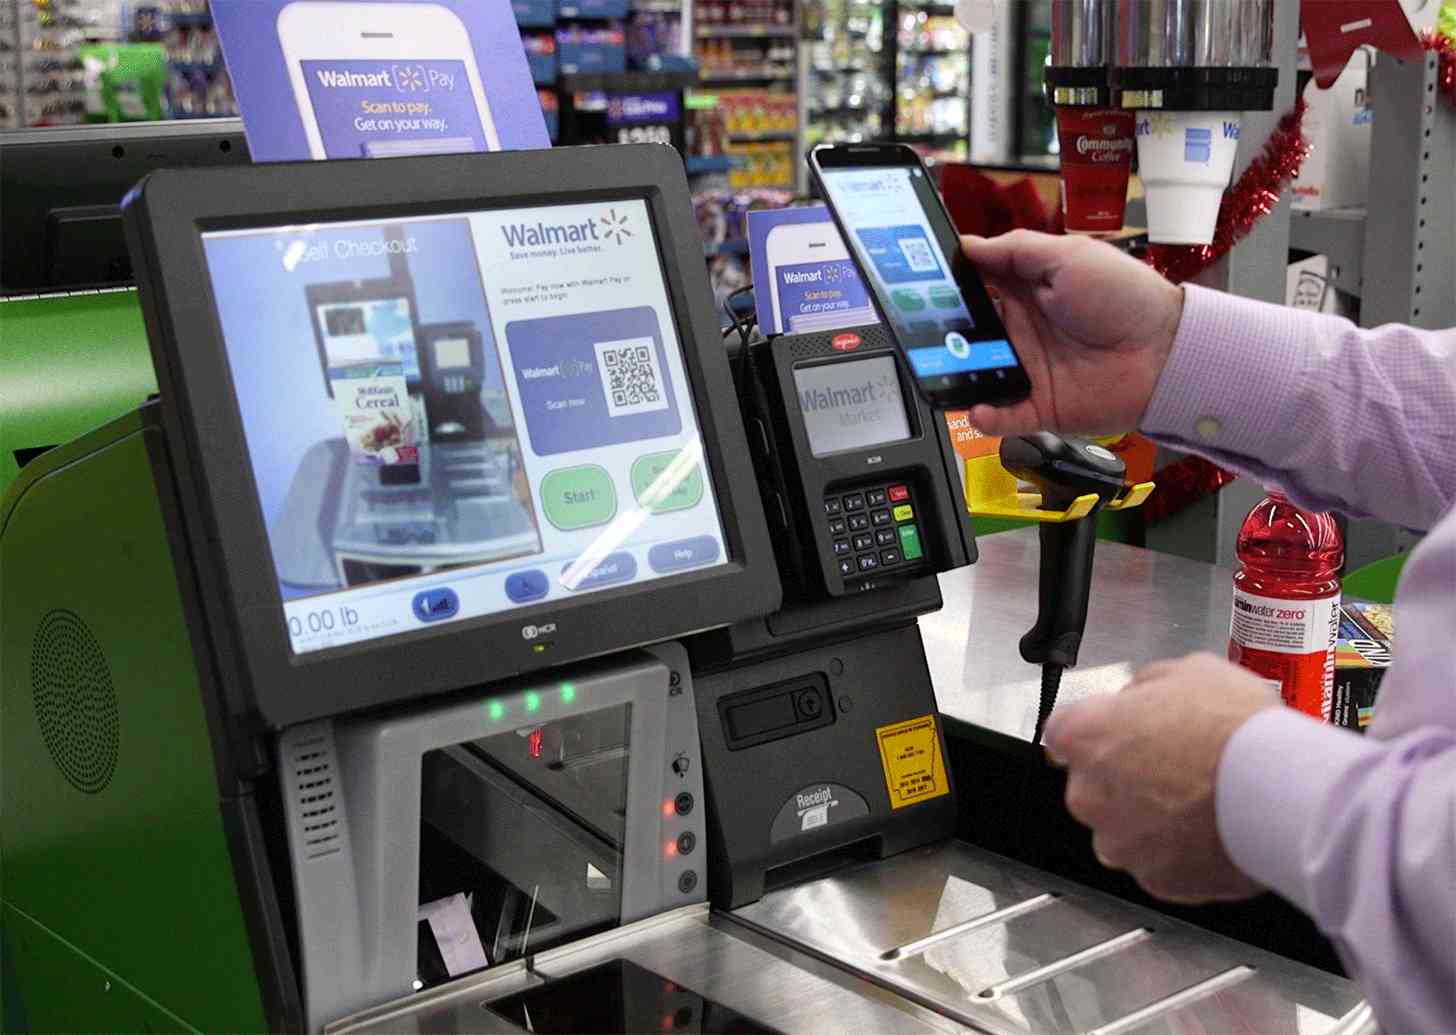 Walmart Pay in use